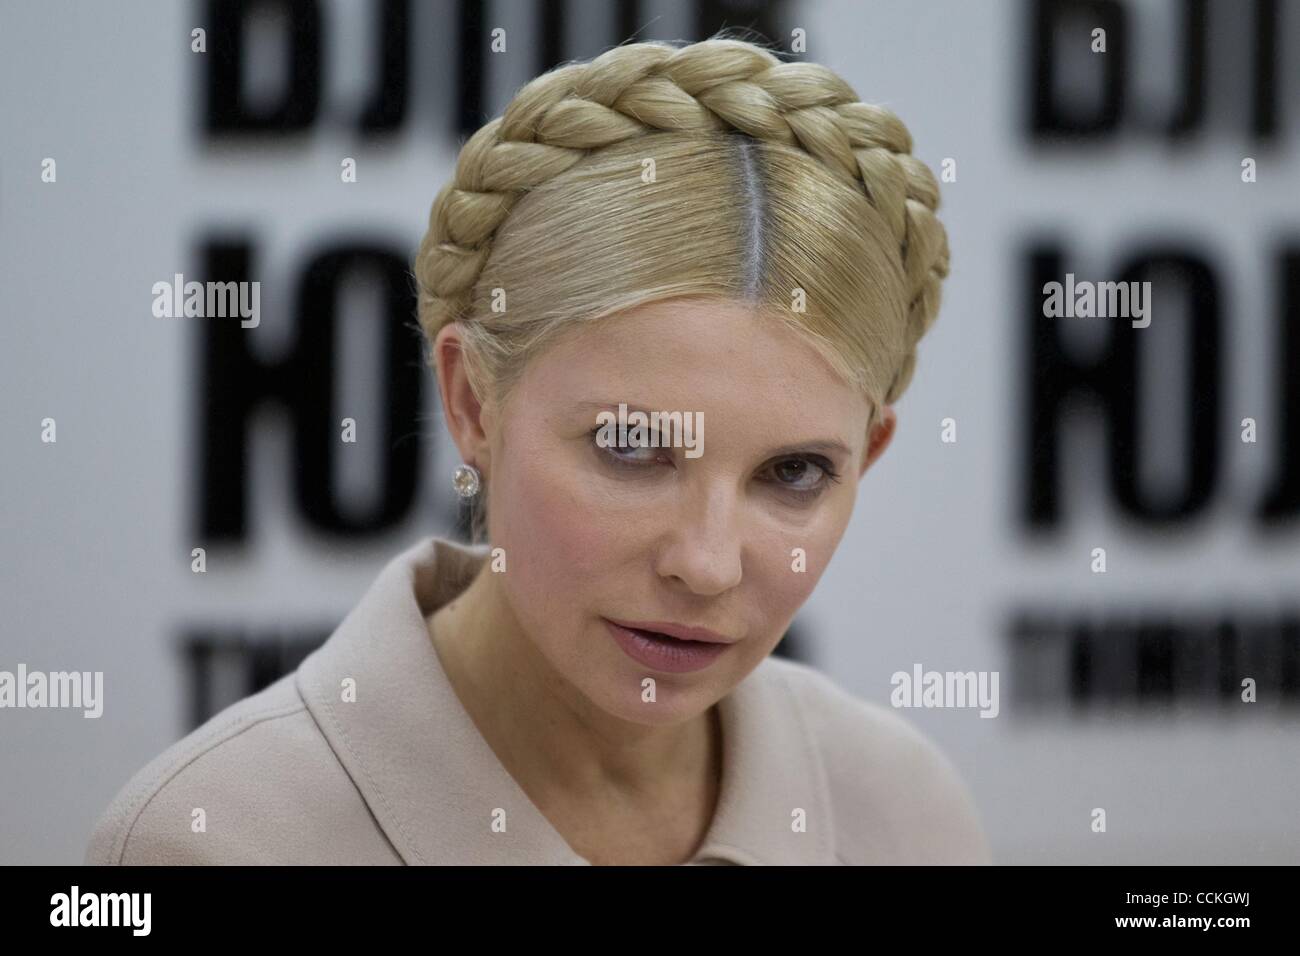 Nov 27, 2010 - Kiev, Ukraine - Former Prime Minister YULIA TYMOSHENKO attends a political repressions Memory Day event in Kiev. Former Ukrainian Prime Minister Yulia Tymoshenko (leader of Batkivshchina oppositional party) has announced that the Prosecutor General's Office of Ukraine has placed furth Stock Photo